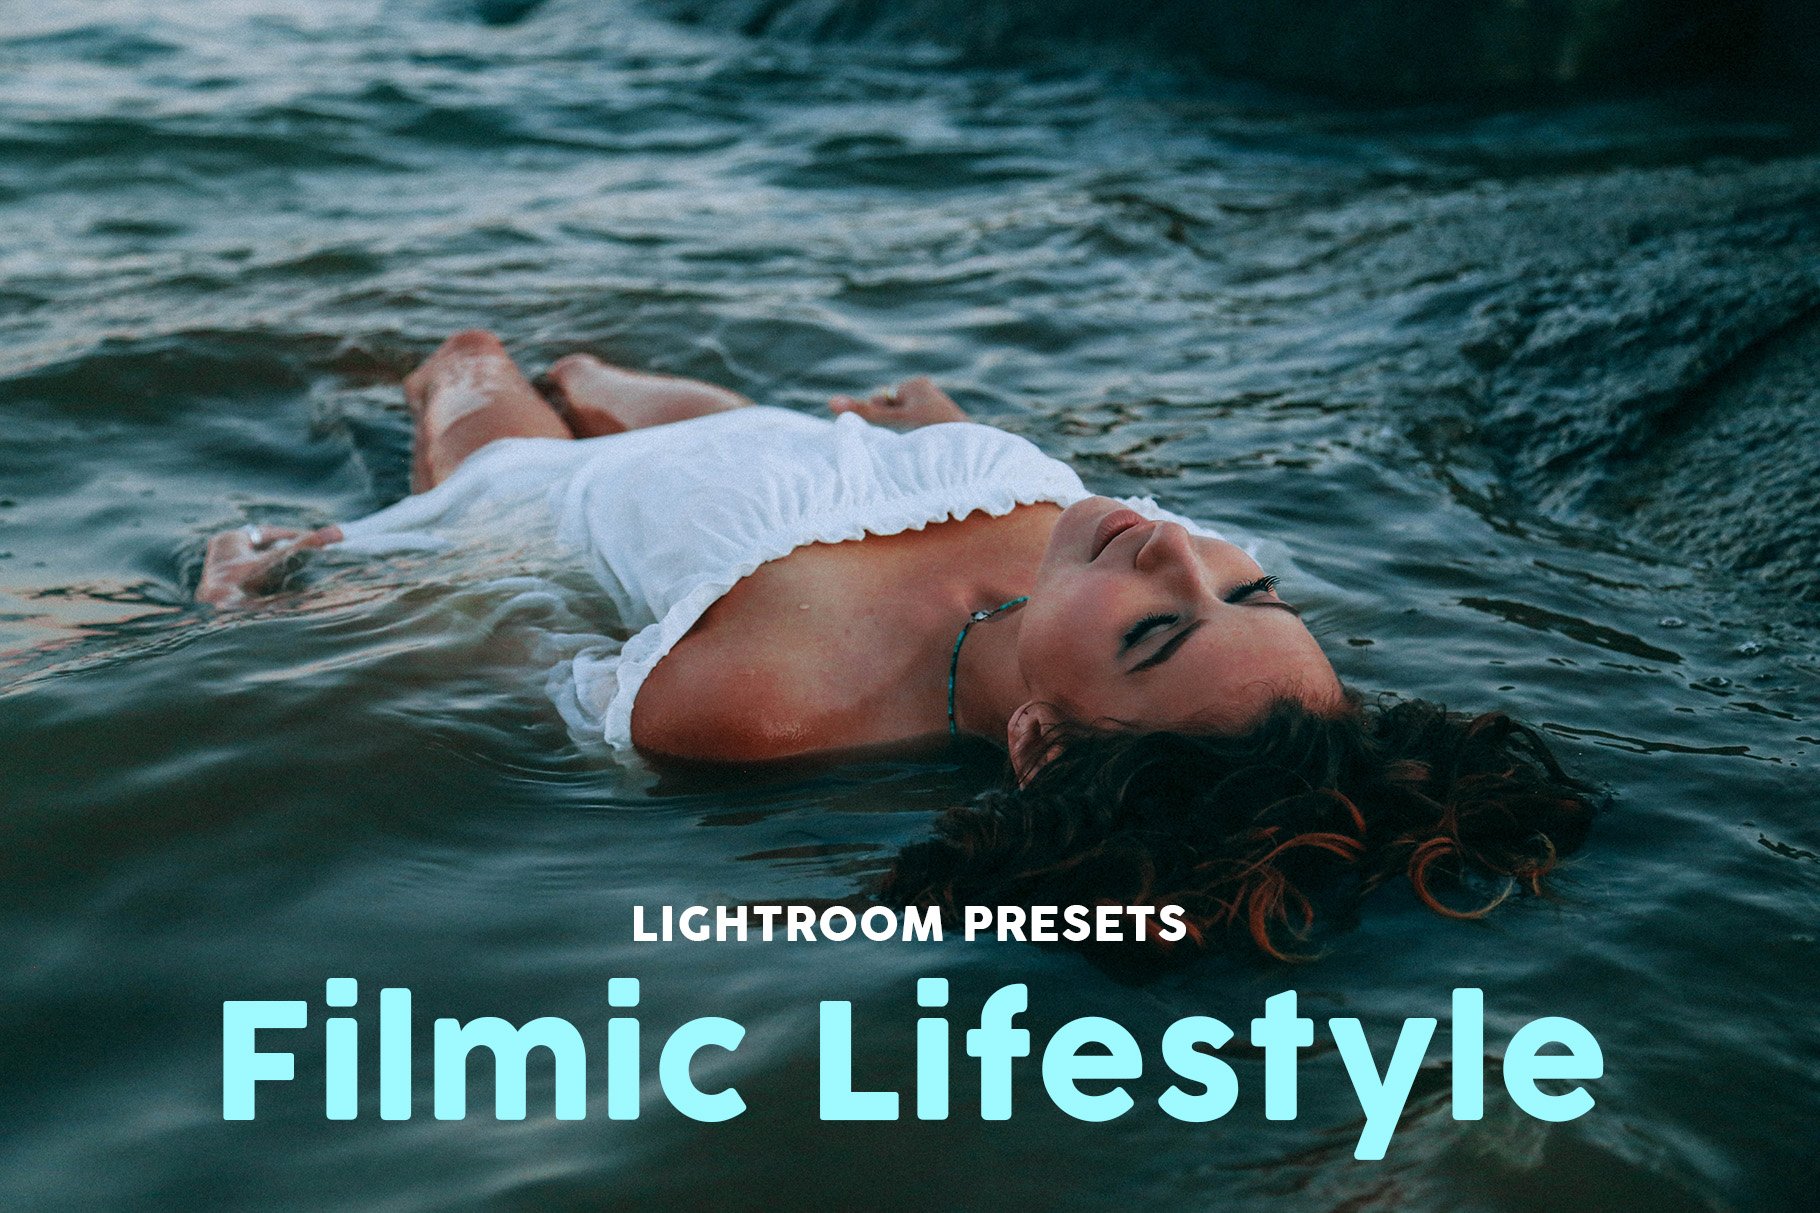 Filmic Lifestyle Lightroom Presetscover image.